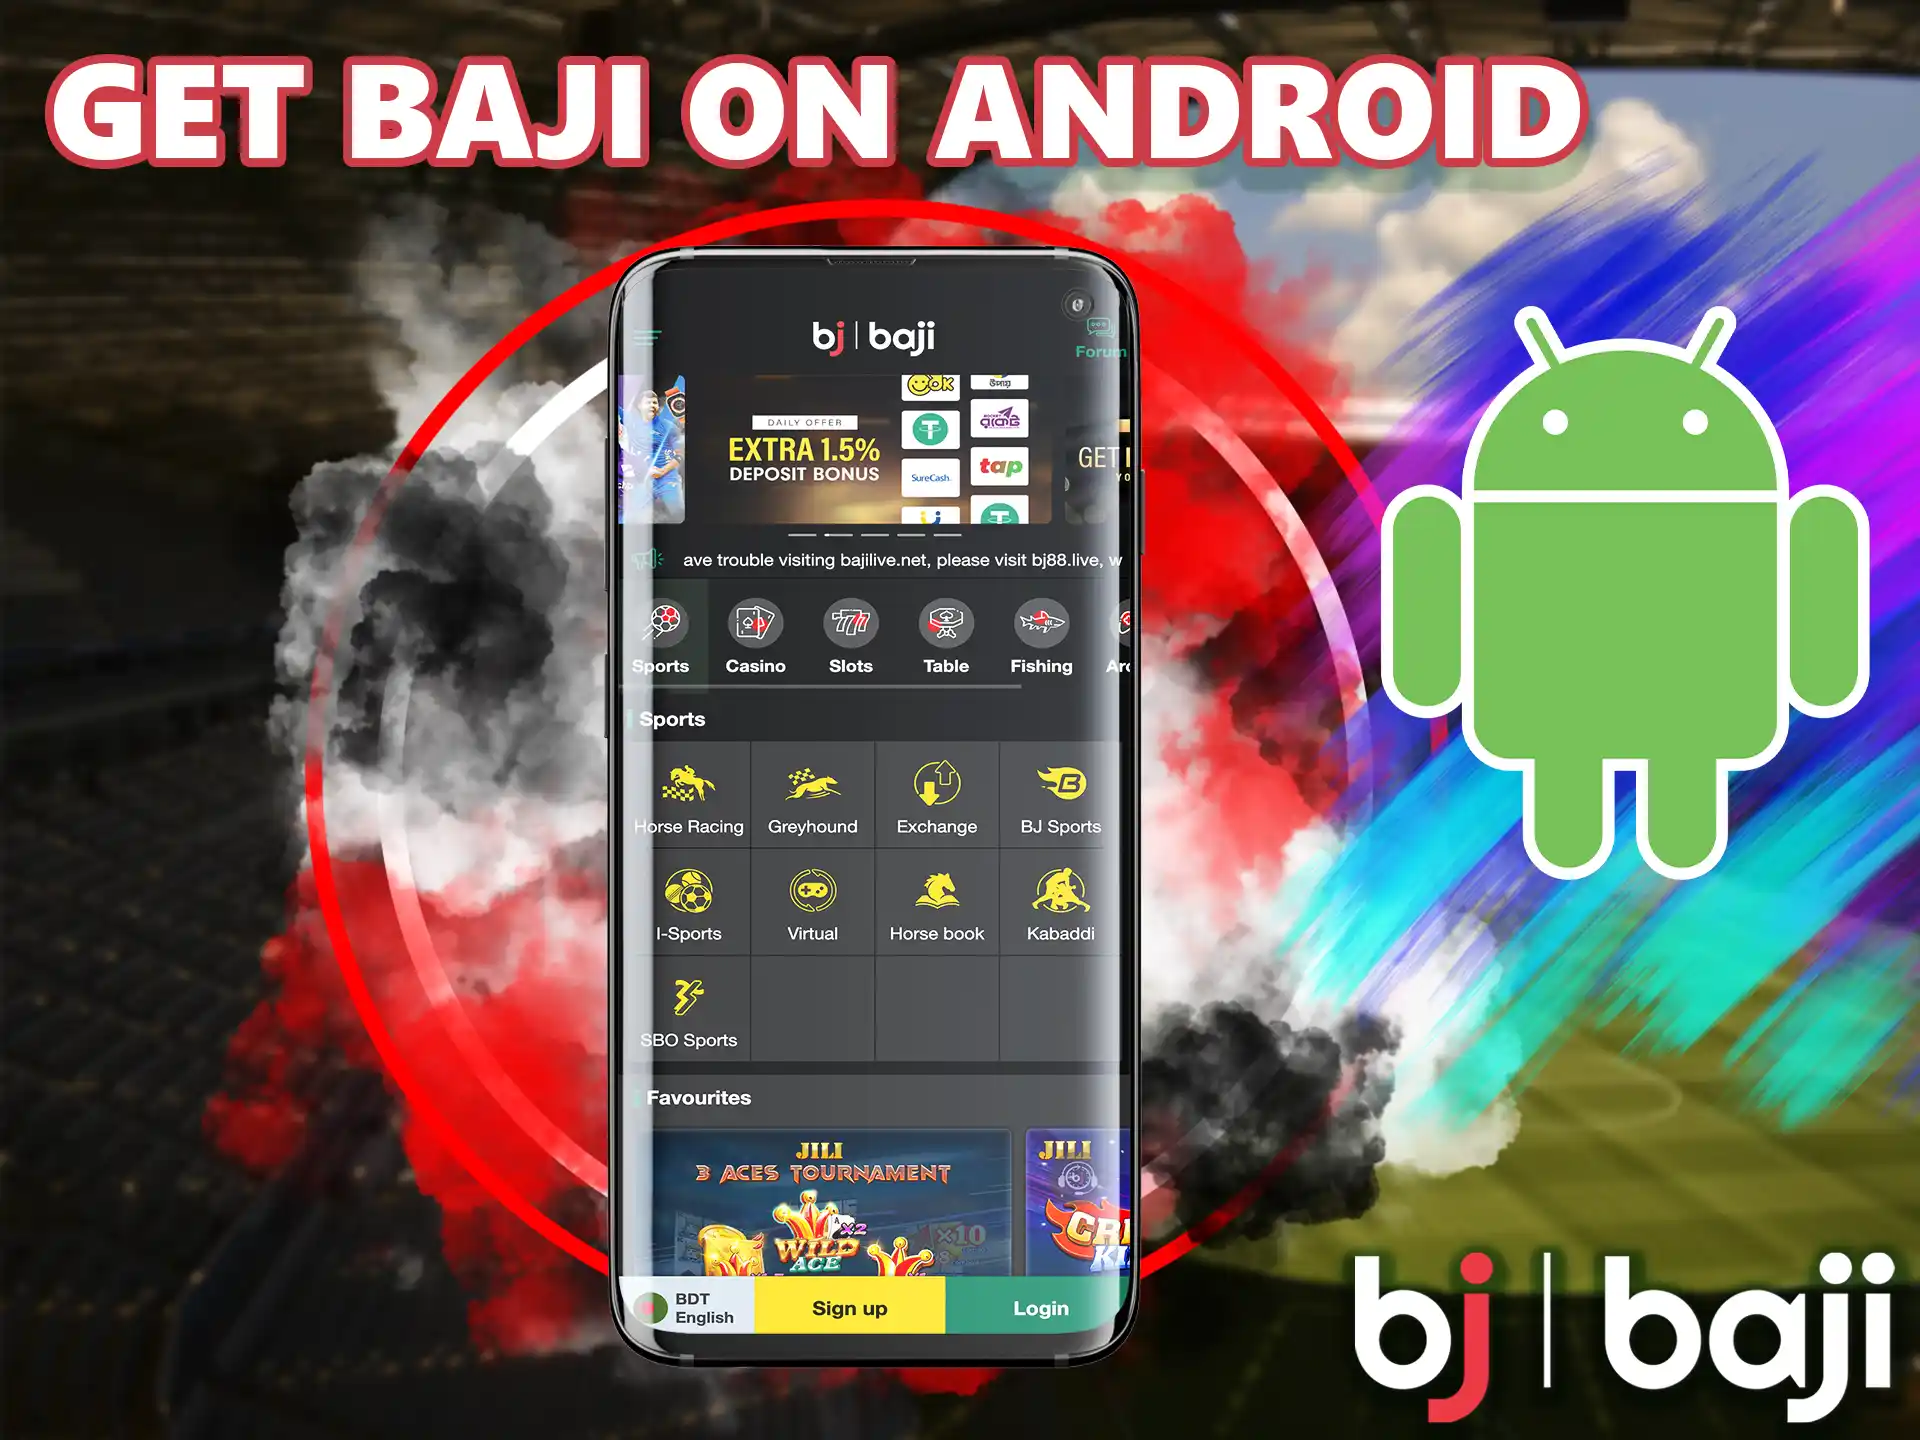 To get the mobile Baji app on your smartphone, just download the apk file and follow the instructions.